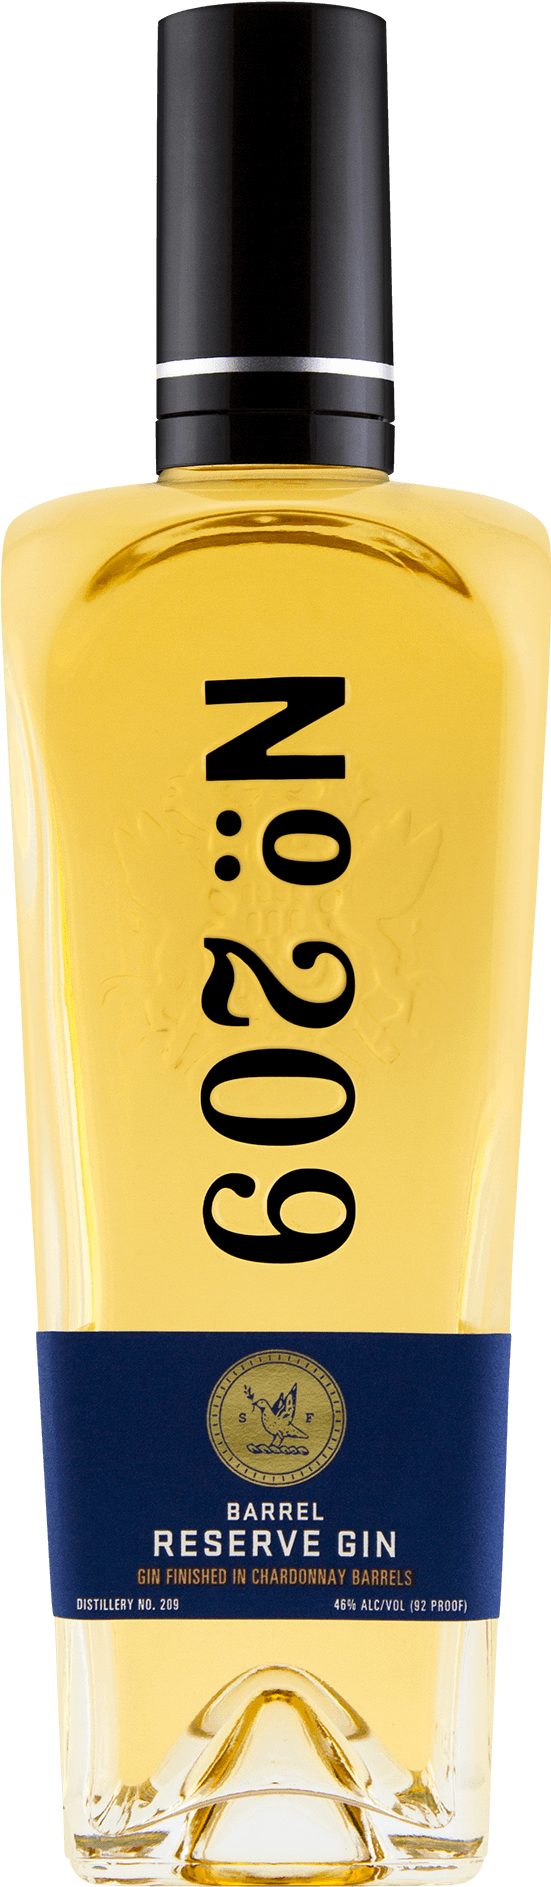 A Yellow Glass With Black Numbers